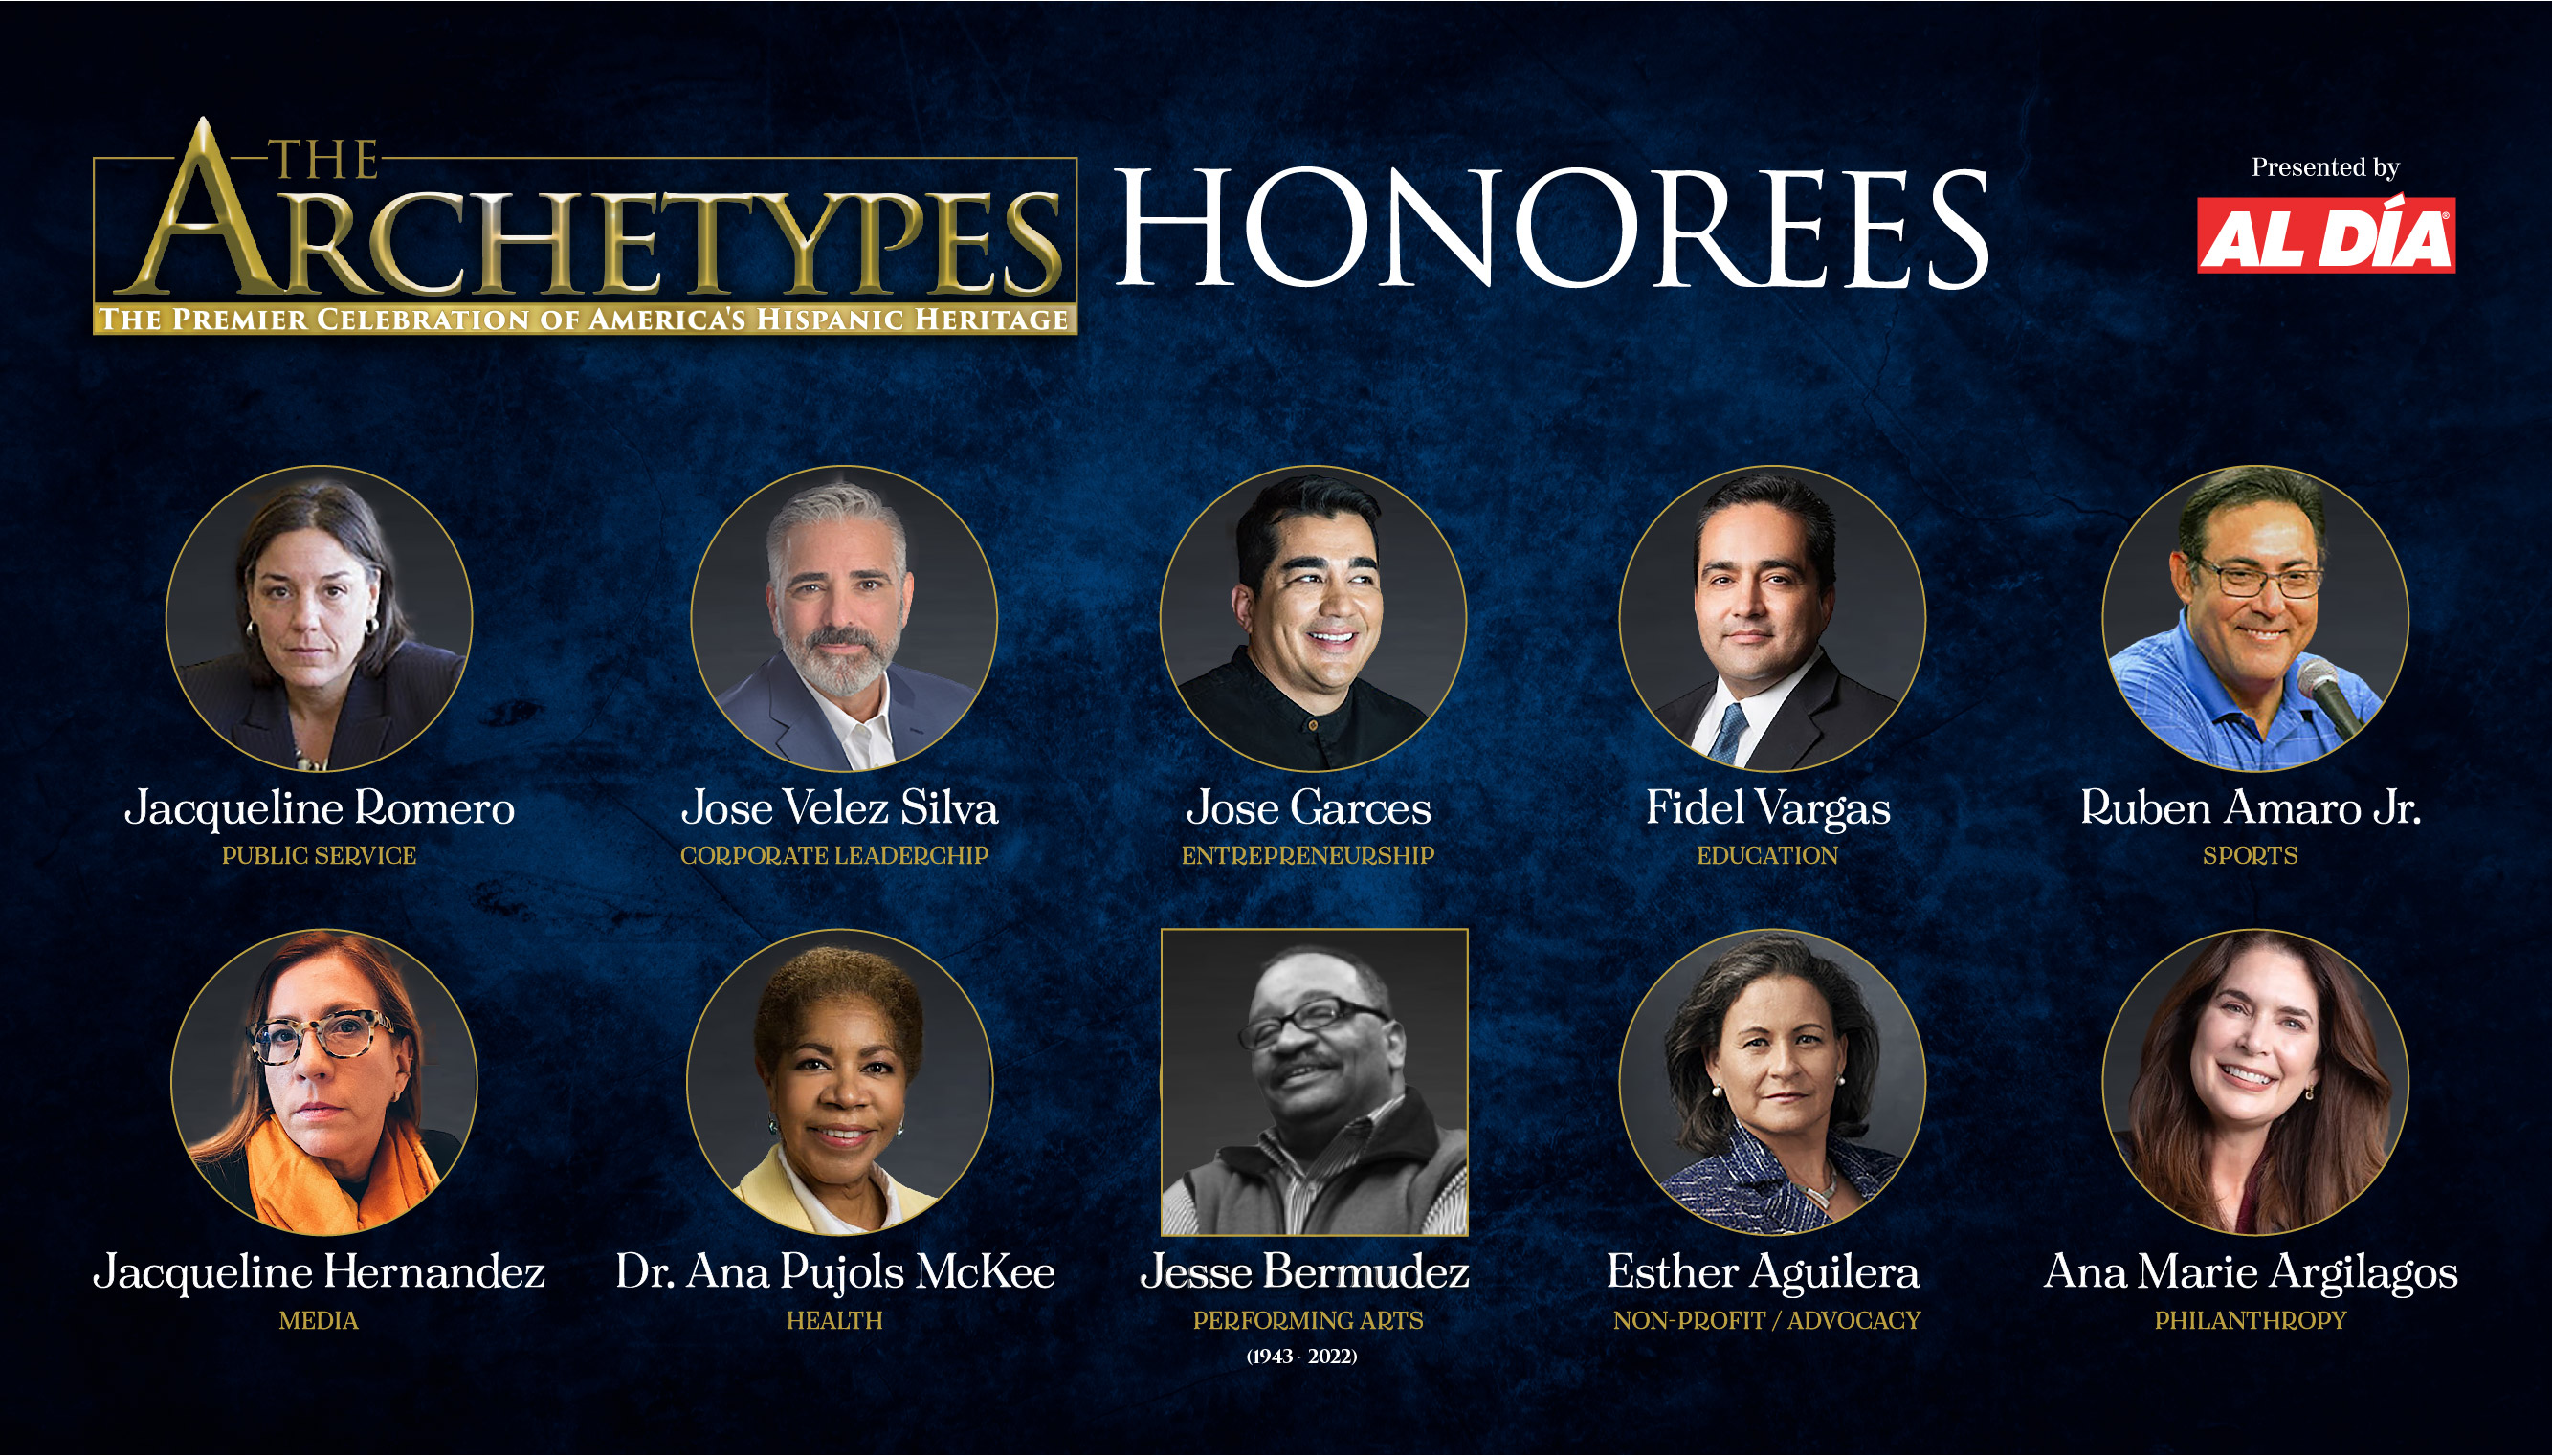 These are the 2022 AL DÍA Archetypes to be honored on Friday, Sept. 23, 2022 during Hispanic Heritage Month. Photo: Maybeth Peralta/AL DÍA News.